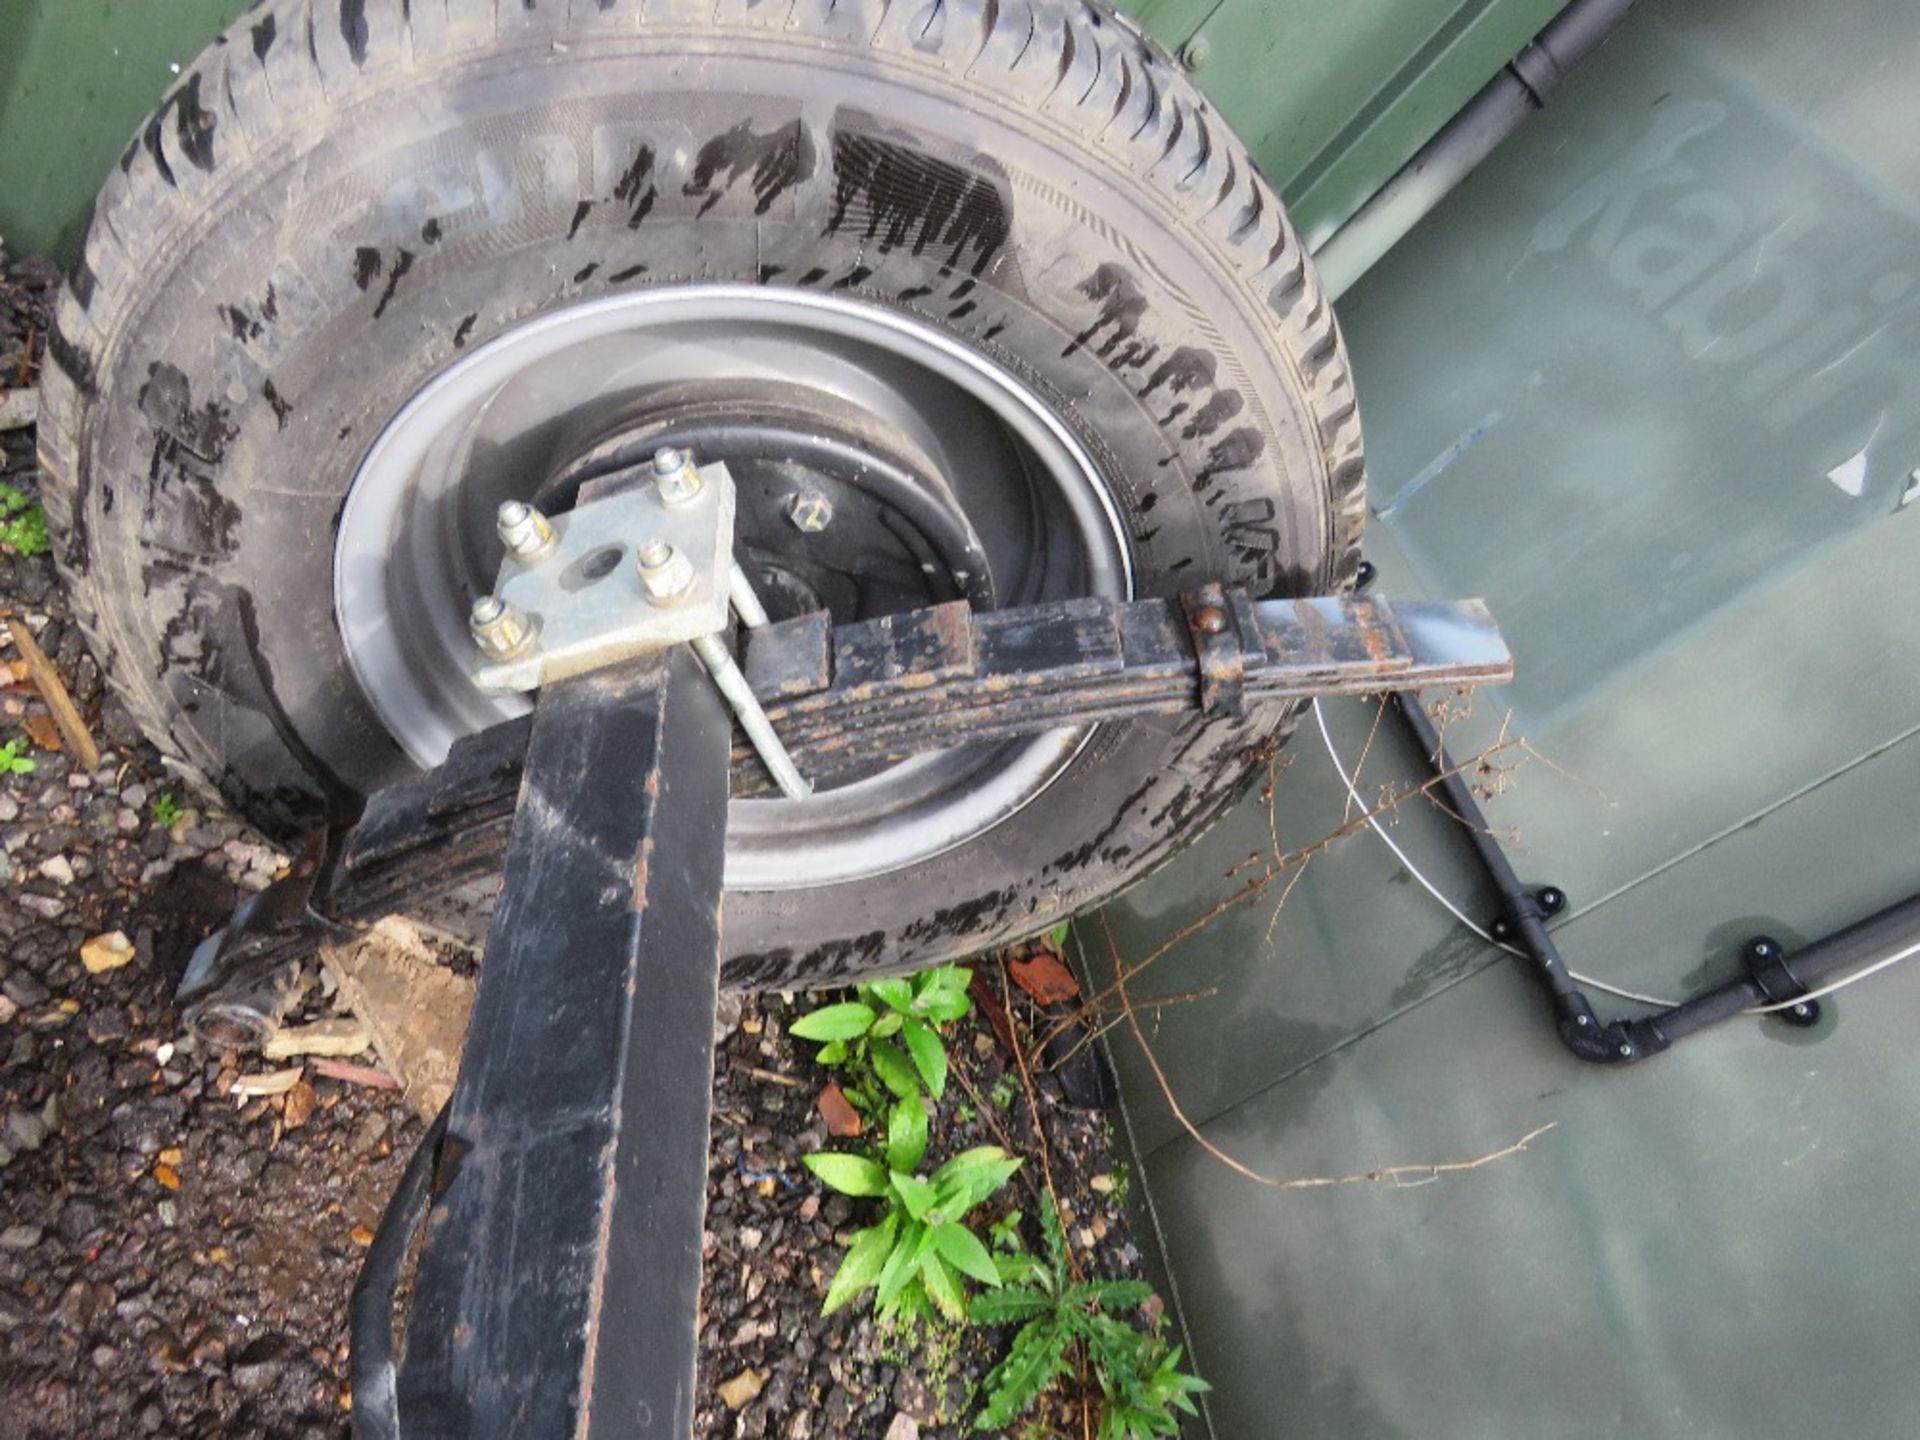 HEAVY DUTY TRAILER AXLE WITH SPINGS, BELIEVED TO BE OFF GROUNDHOG TYPE WELFARE UNIT?? ....THIS LOT I - Image 4 of 6